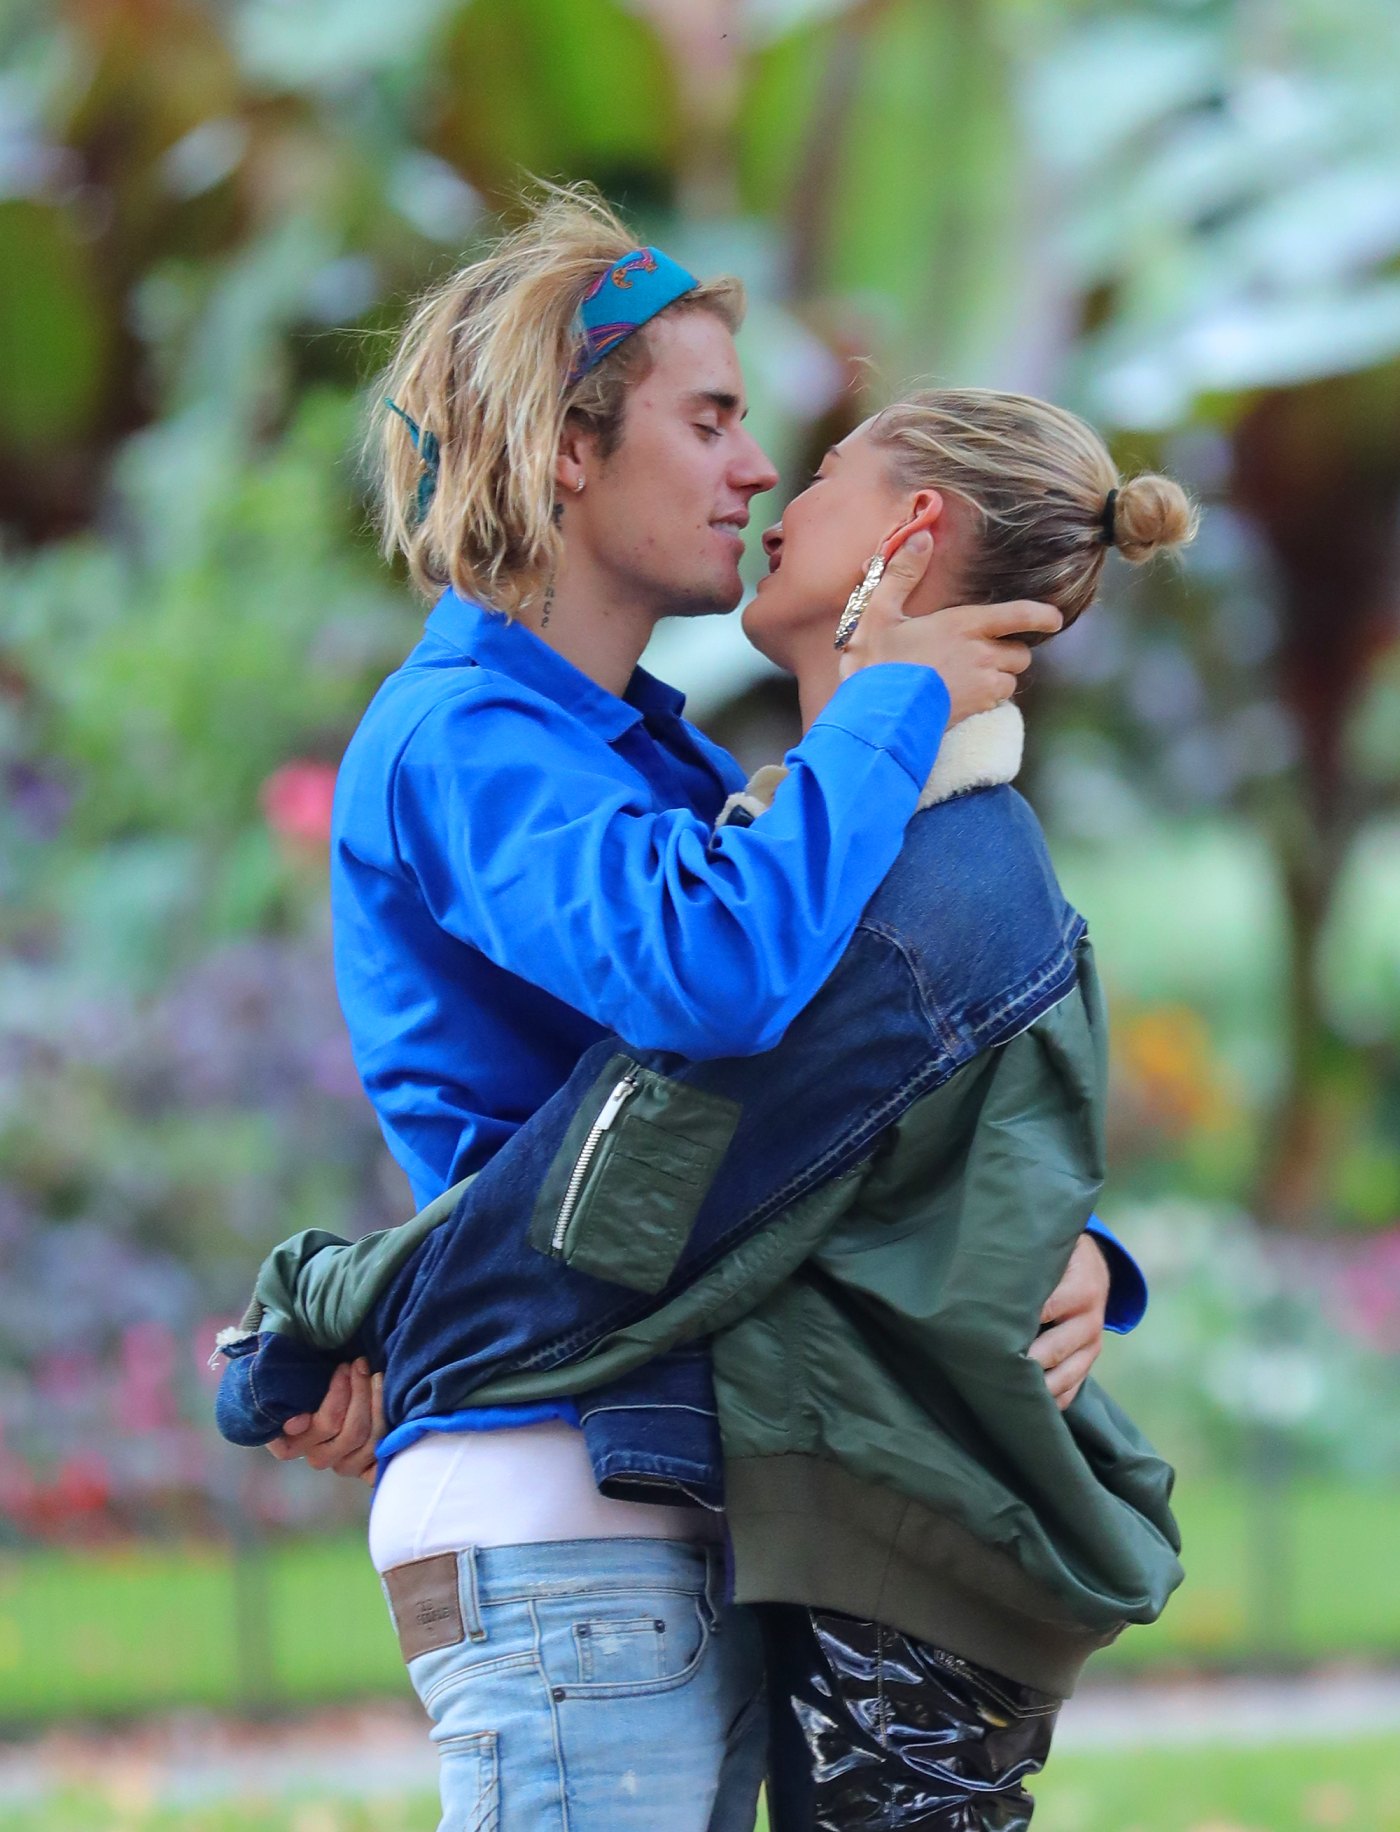 Justin Bieber and Hailey Baldwin A Timeline of Their Relationship